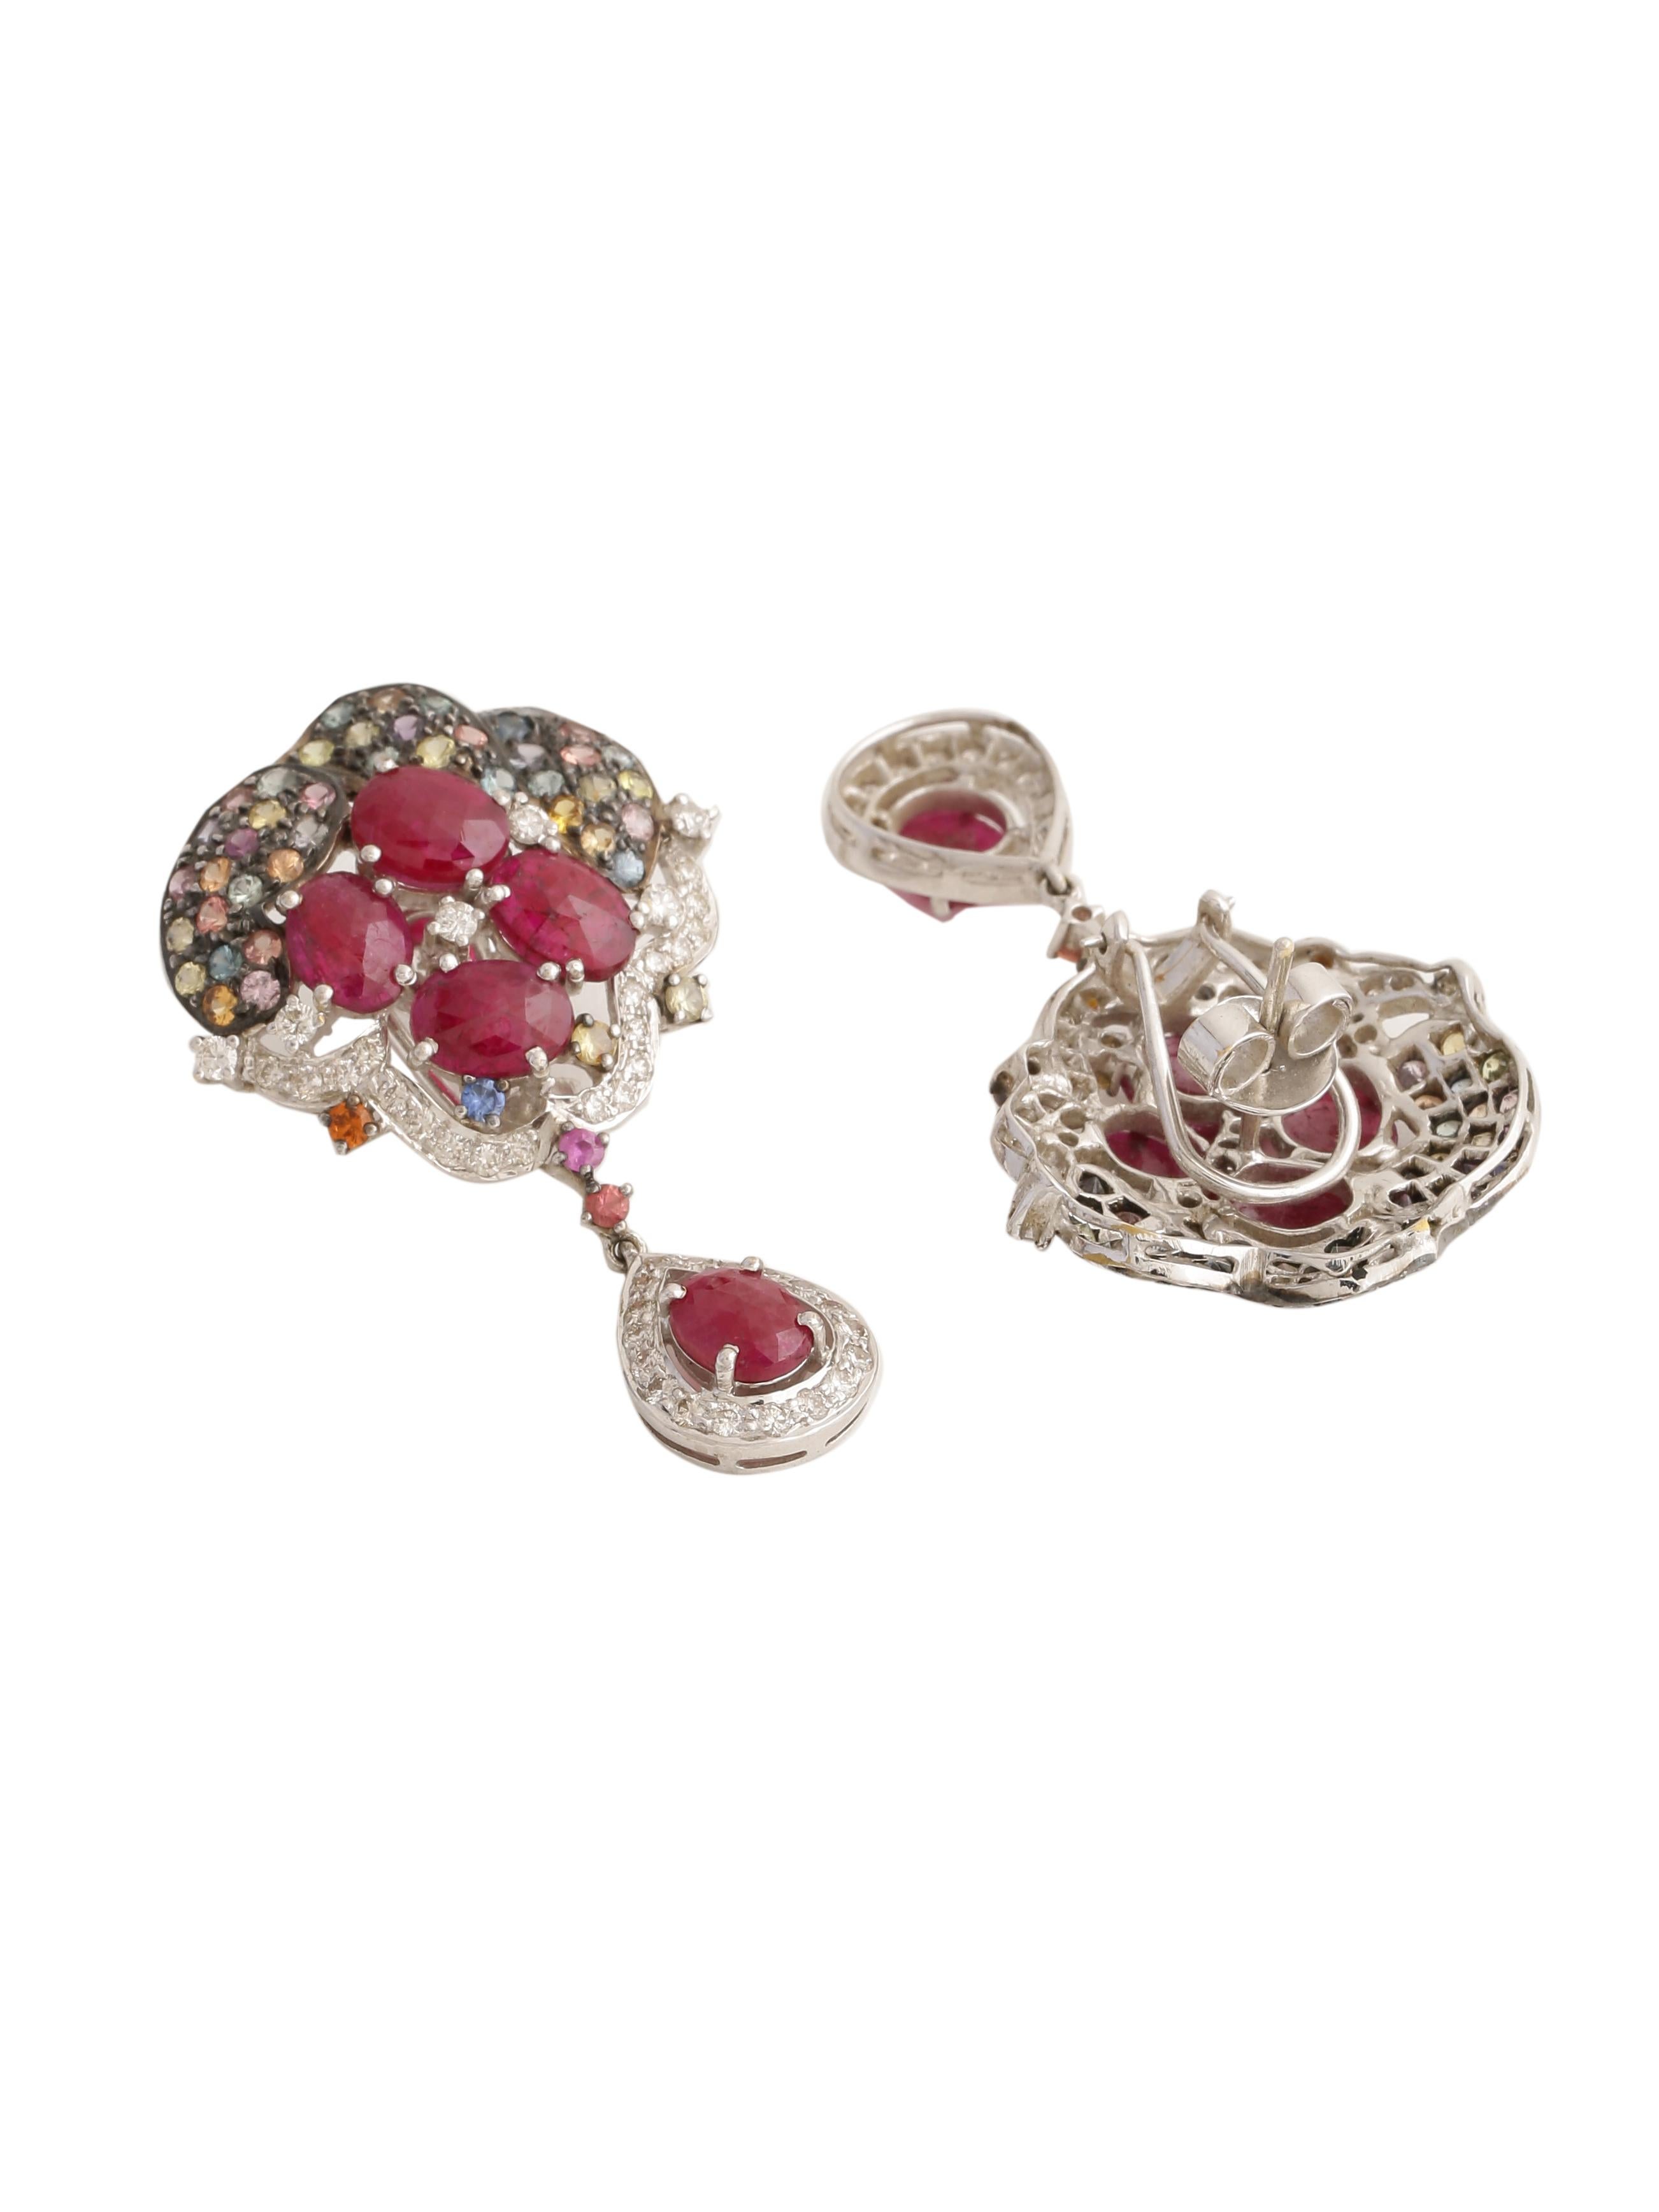 Art Deco Rubies Diamonds and Multi Color Sapphires Earring Pair in 18K Gold For Sale